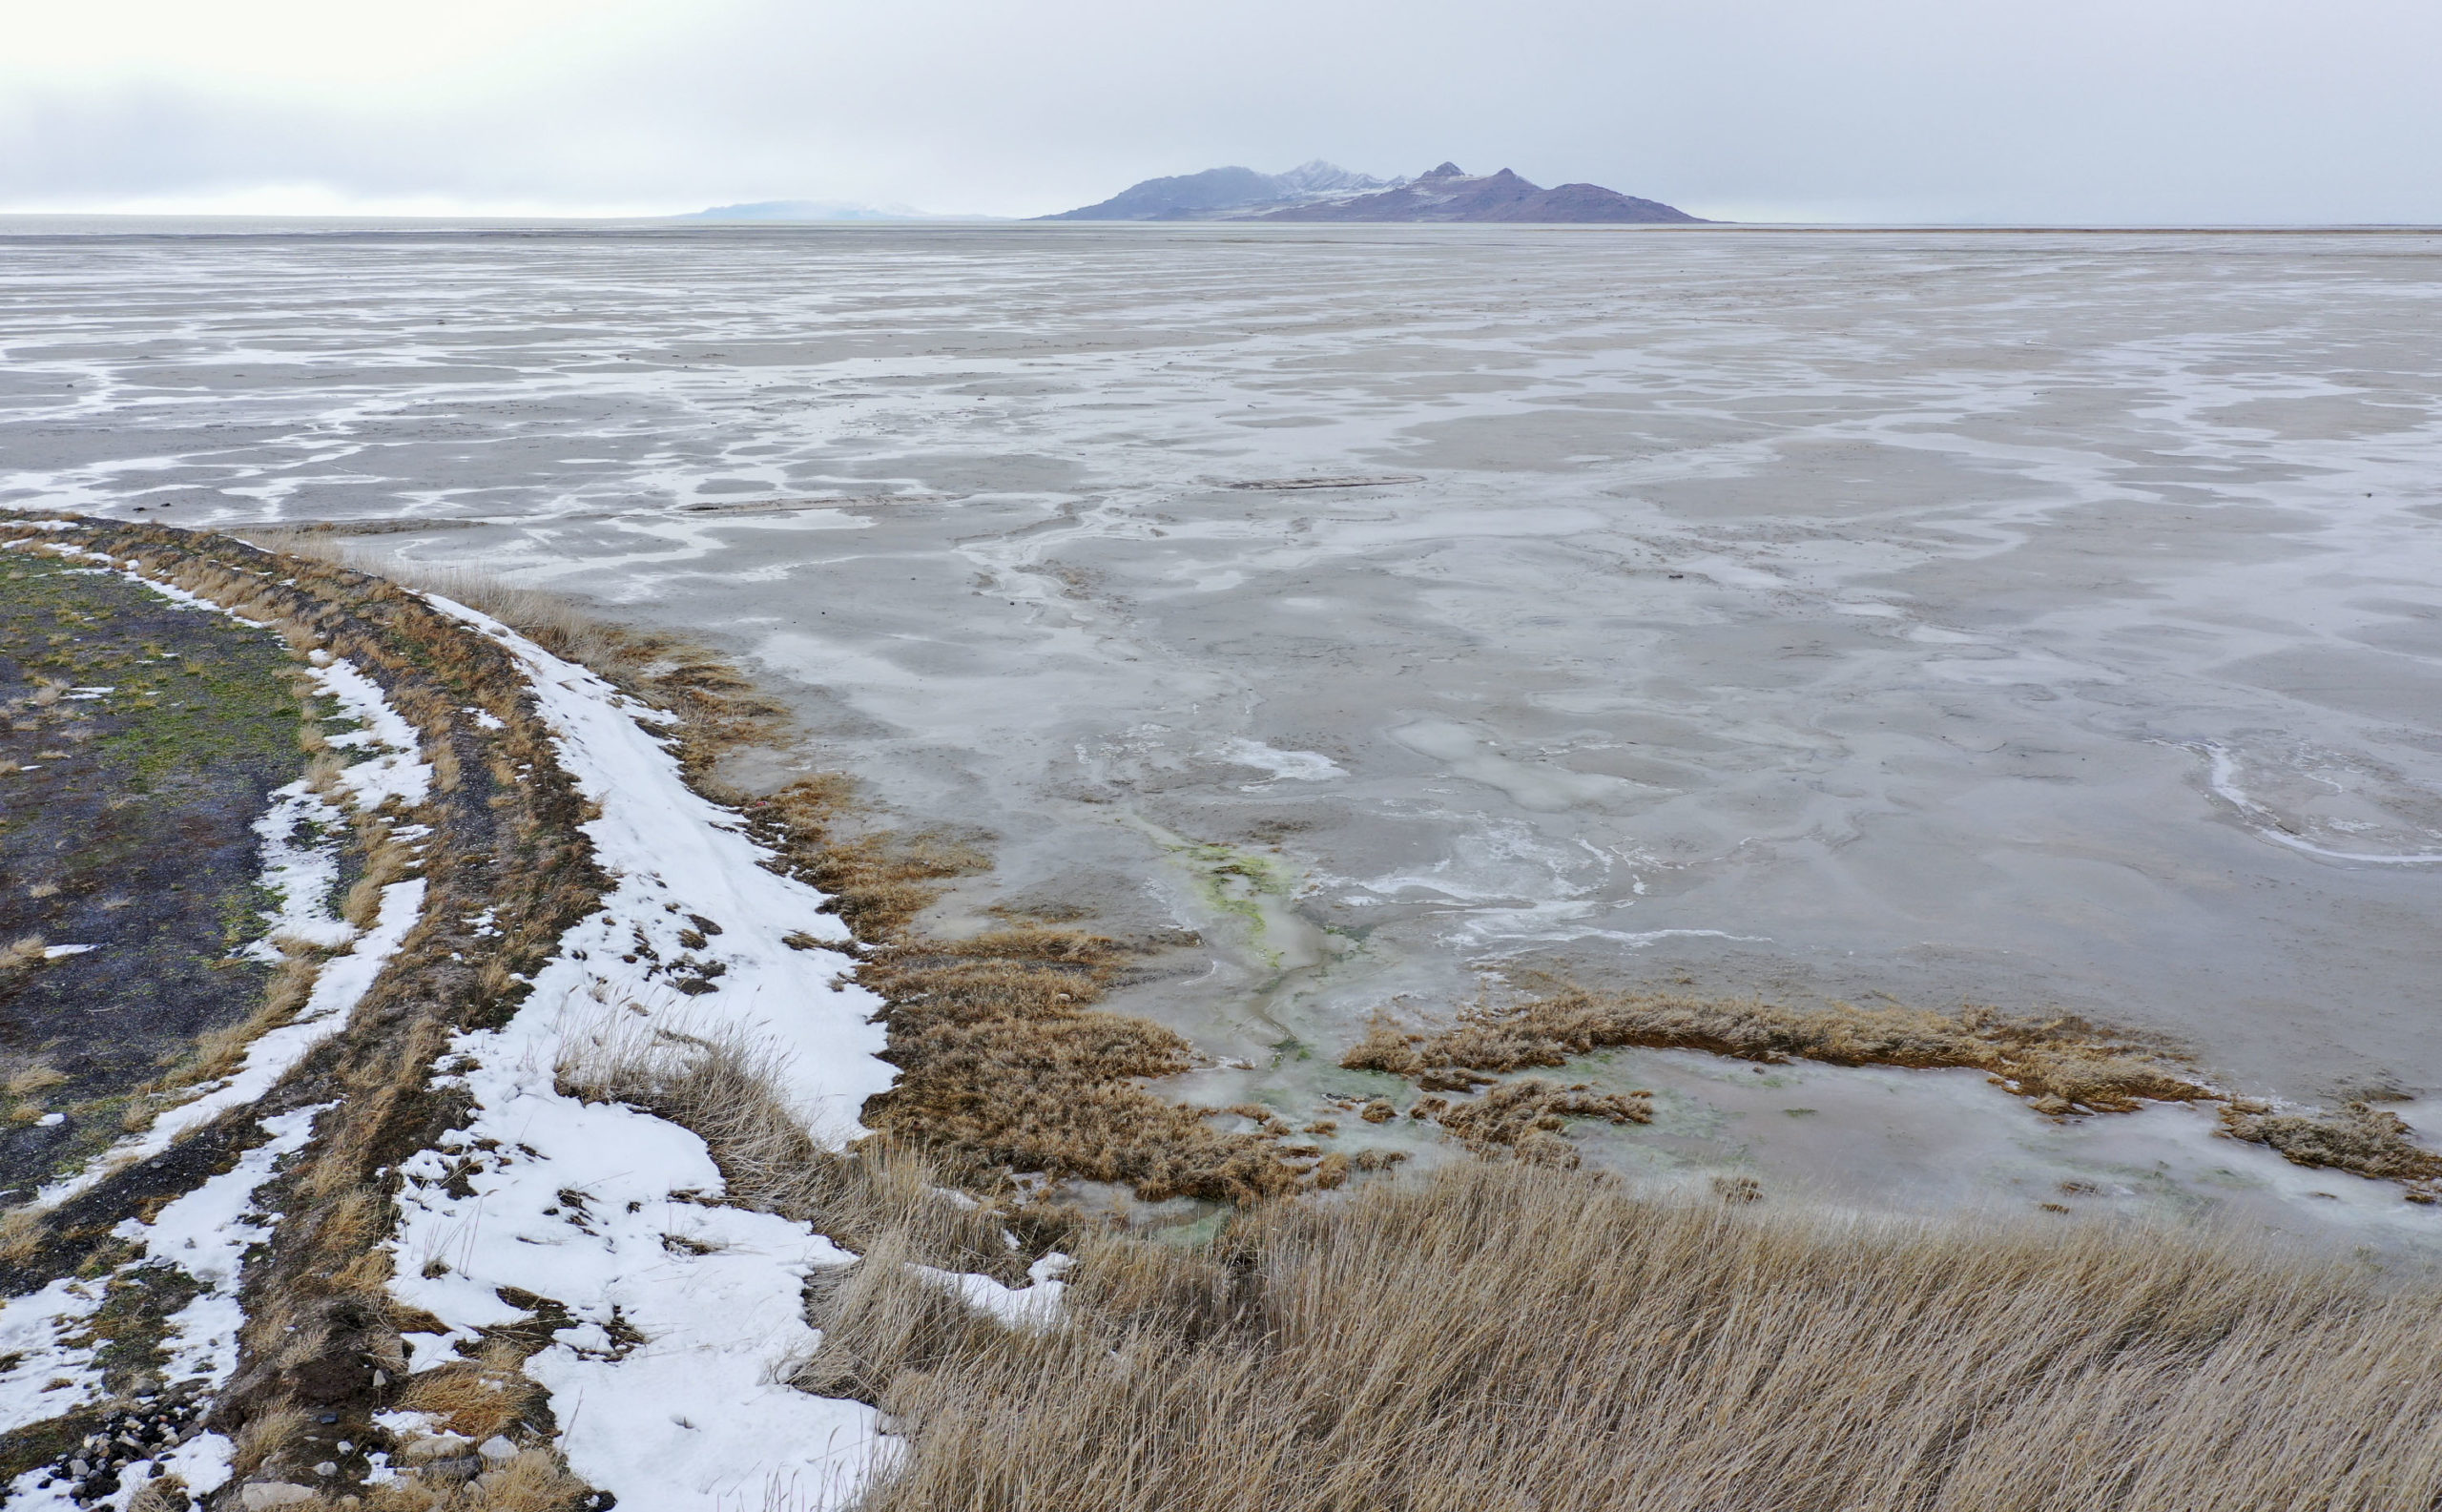 Low levels at the Great Salt Lake are tied to water rights....